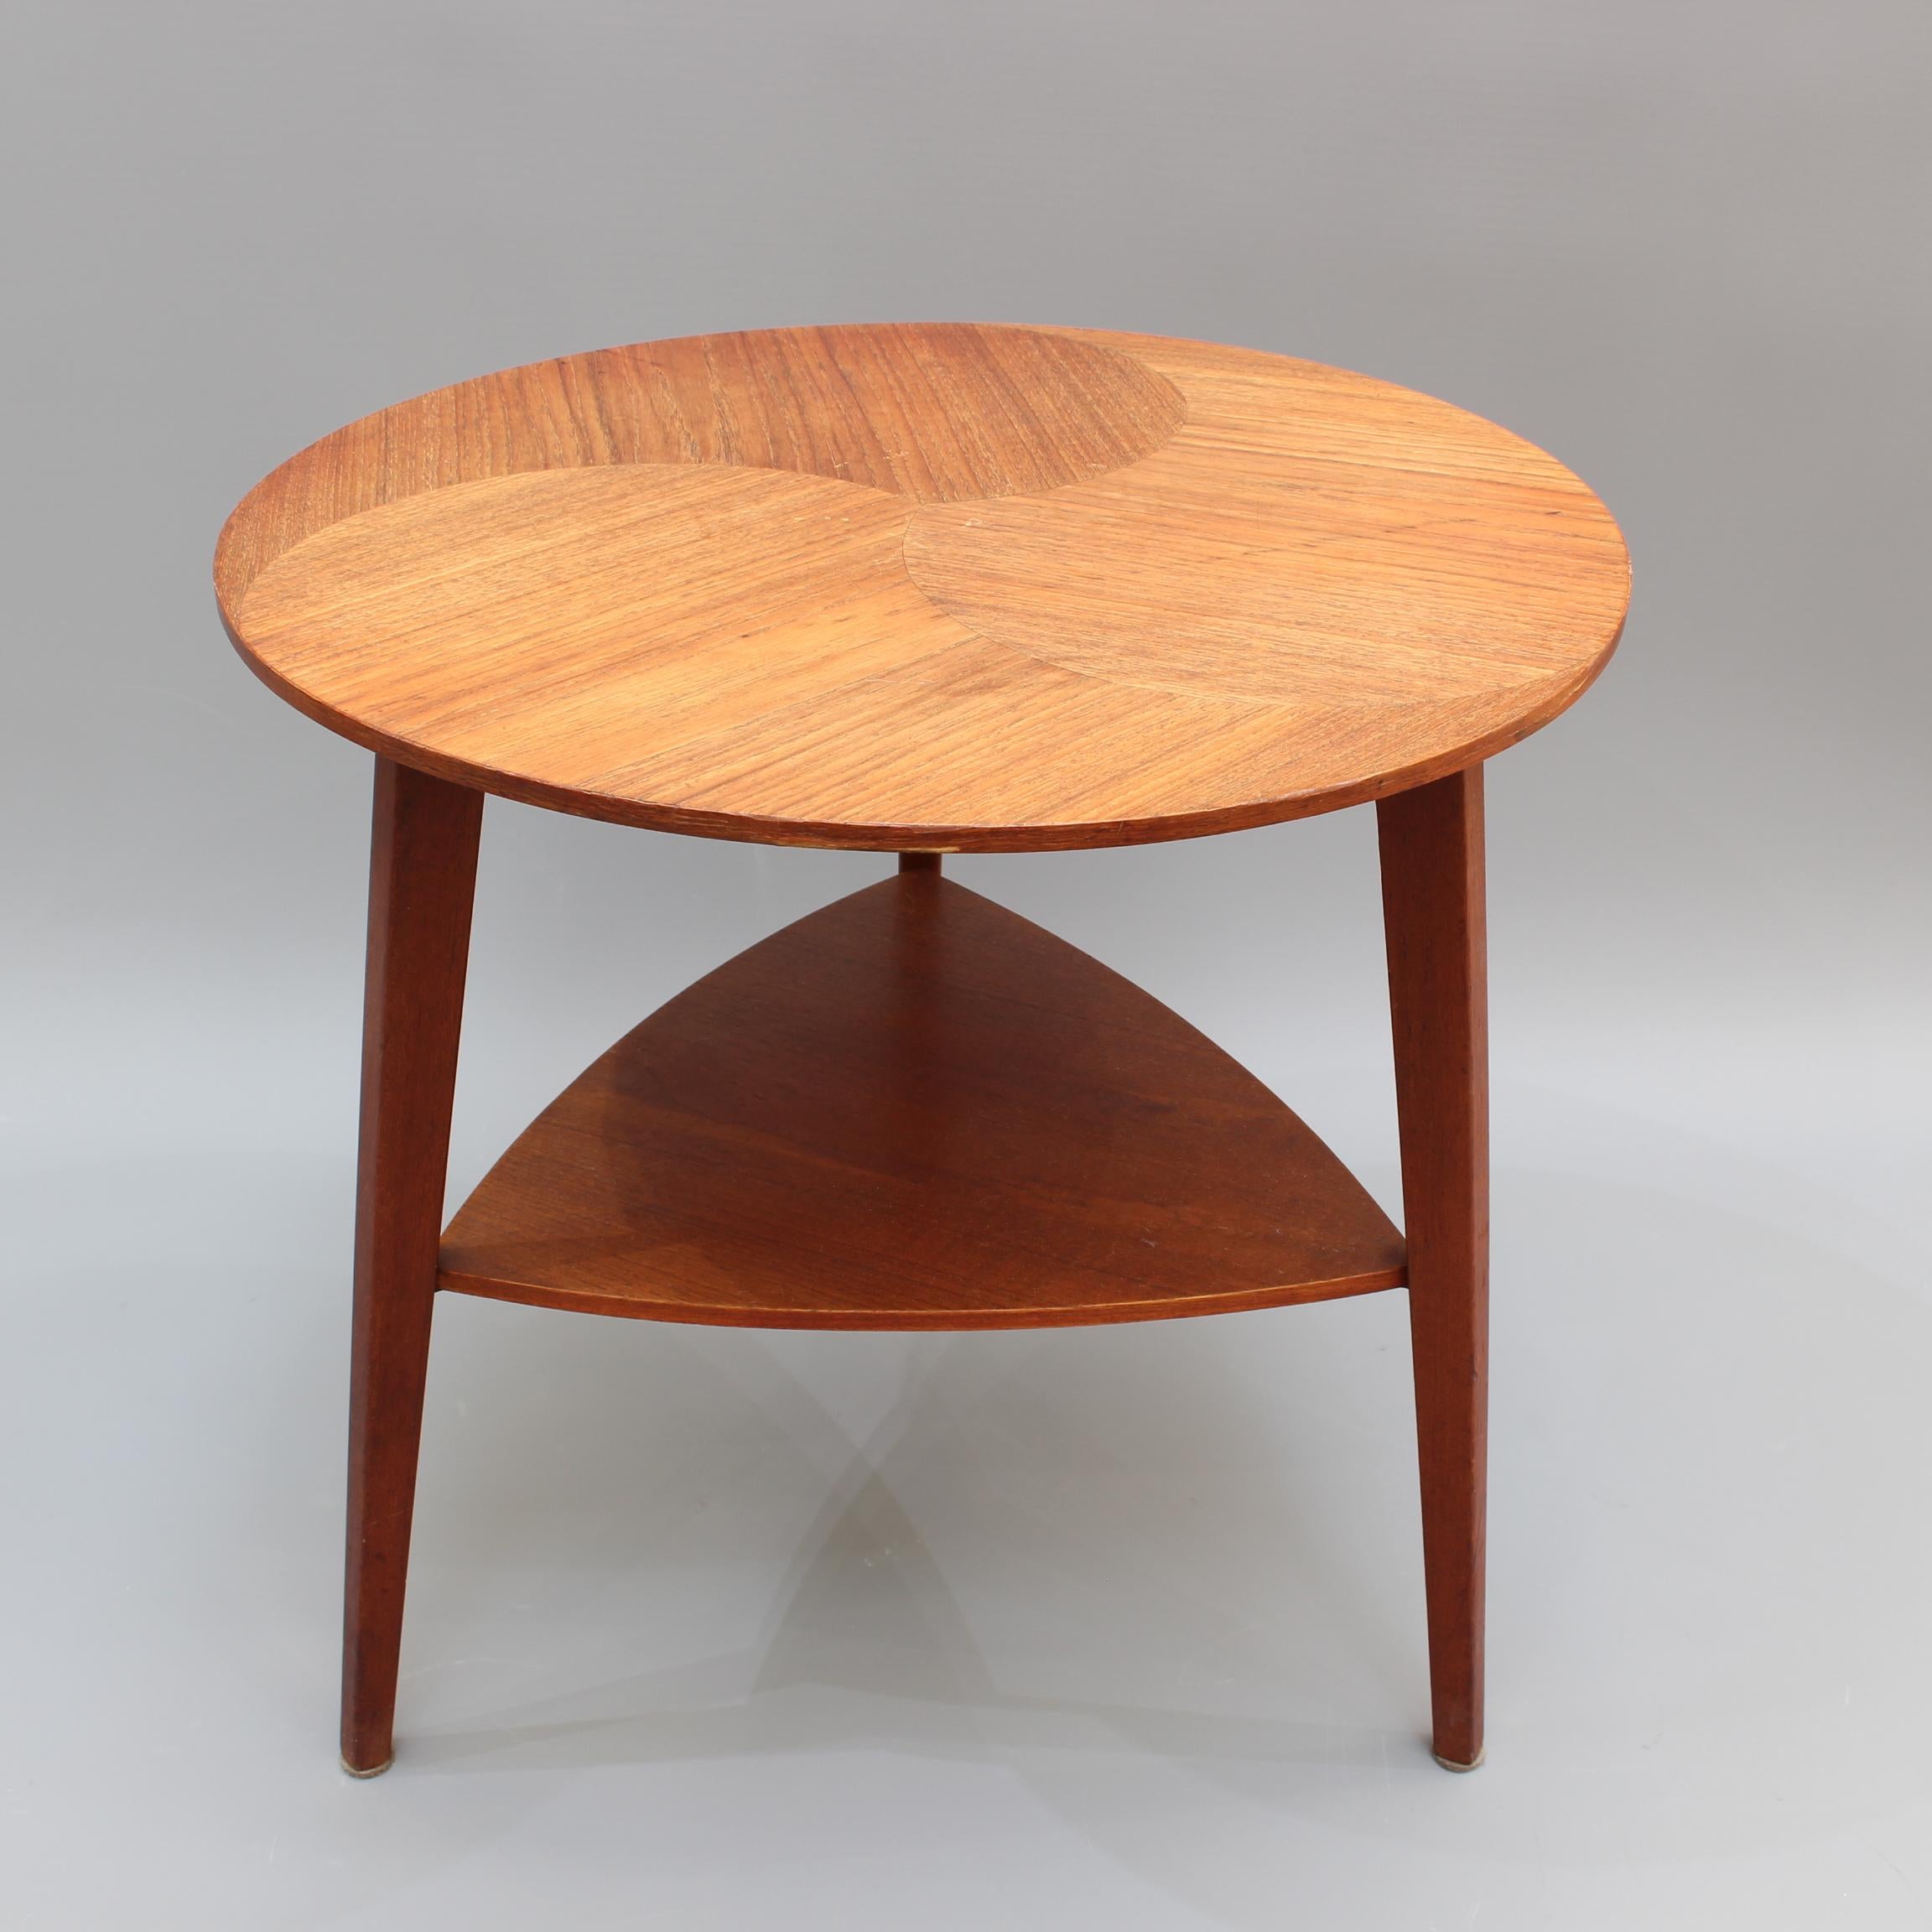 Midcentury Scandinavian side table (circa 1960s). A characterful side table with wood veneer, circular top and triangular-shaped lower storage surface structured with tripod legs. Quintessential midcentury Scandinavian design all in one piece.